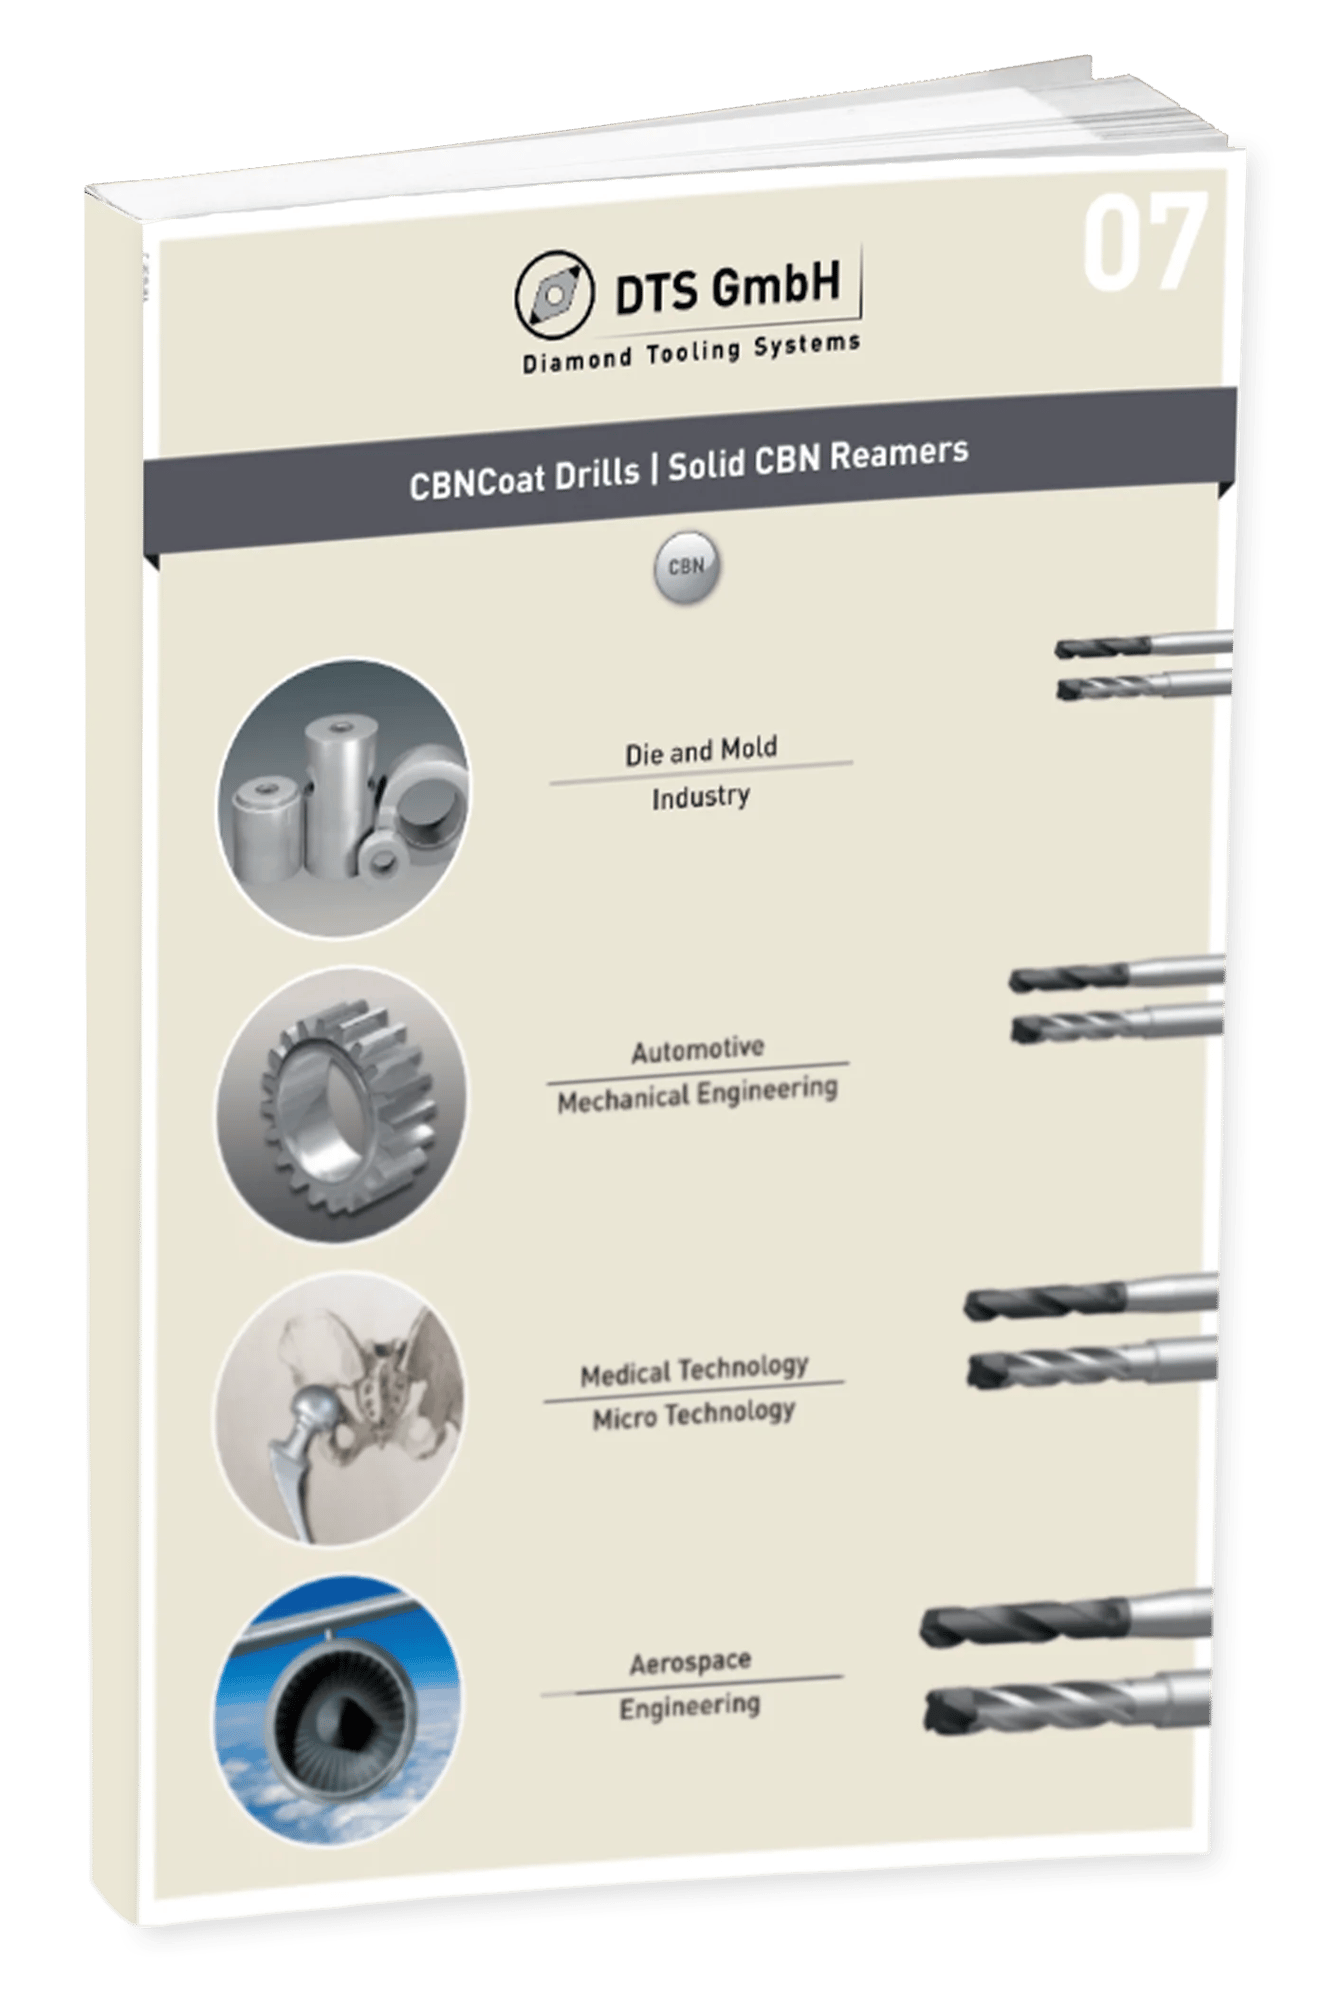 07_Drills-and-Reamers-Catalog_DTSGmbH